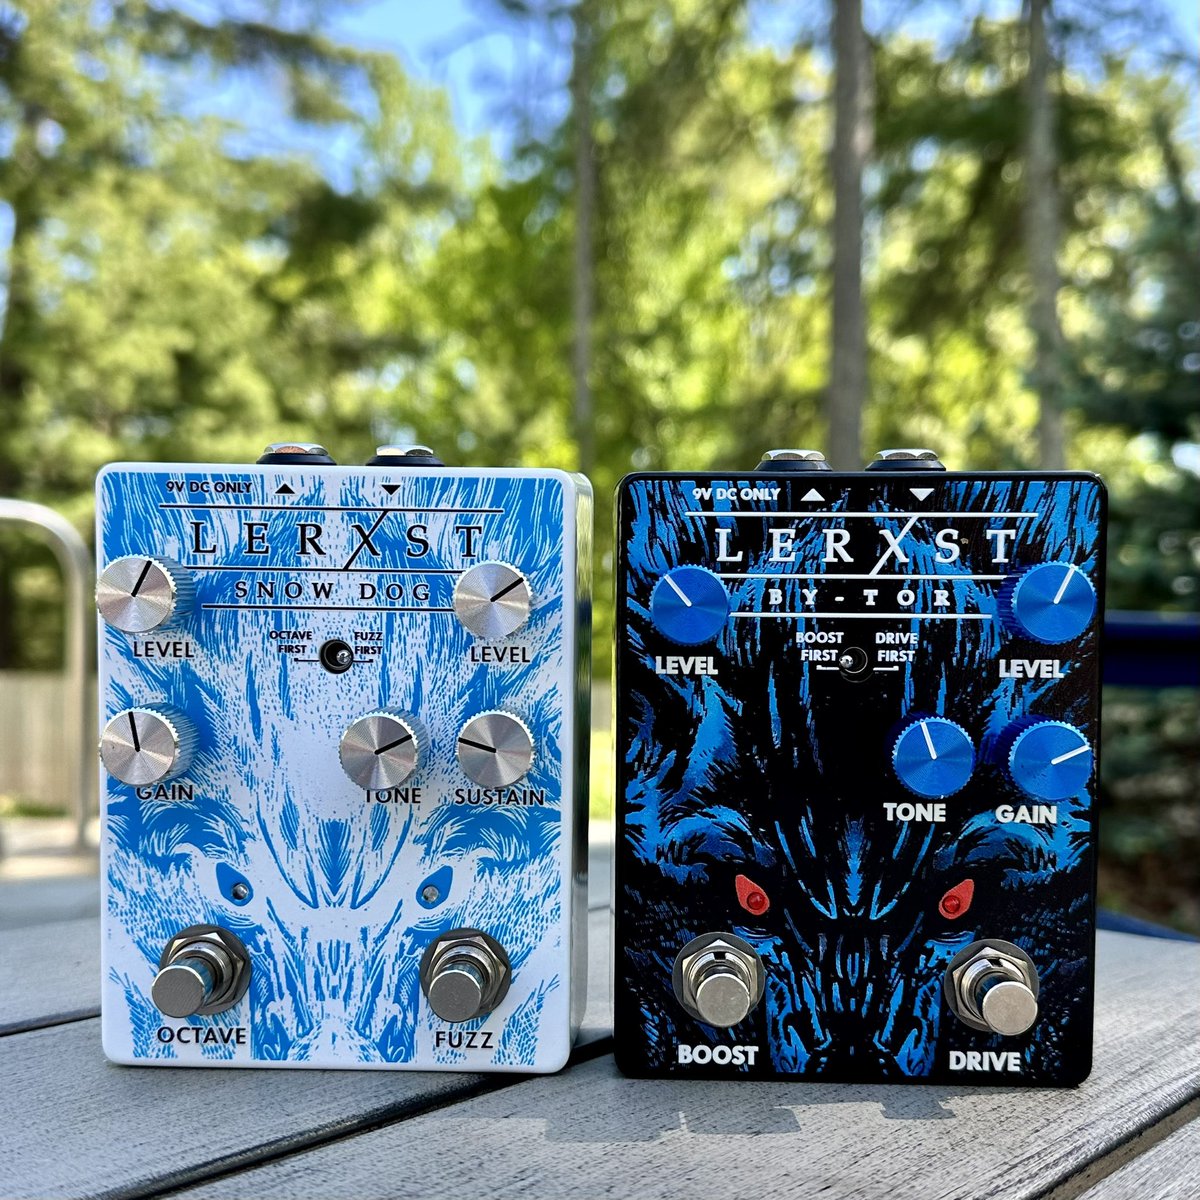 Been having a RUSH of emotions since the crew at @lerxstamps sent over these 2 pedals they designed with #AlexLifeson…can’t wait to dive in, demos soon!!

#pedaloftheday #lerxst #lerxstamps #rush #bytor #snowdog #overdrive #boost #fuzz #octave #guitarpedals